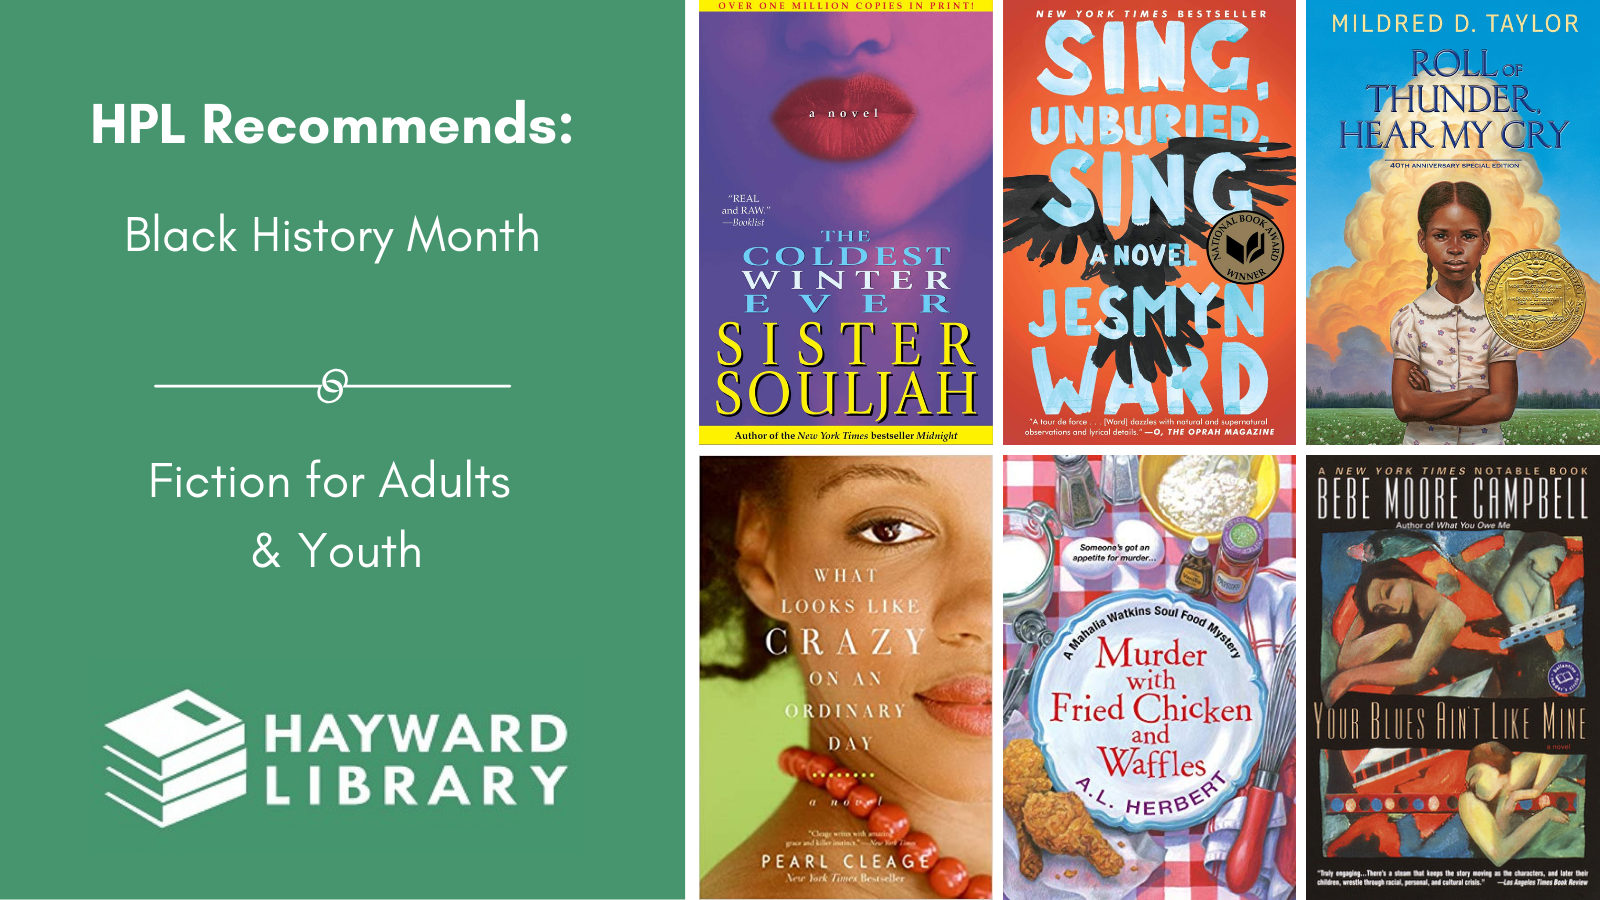 Collage of book covers with a green block on left side that says HPL Recommends, Black History Month, Fiction for Adults & Youth in white text, with Hayward Library logo below it.